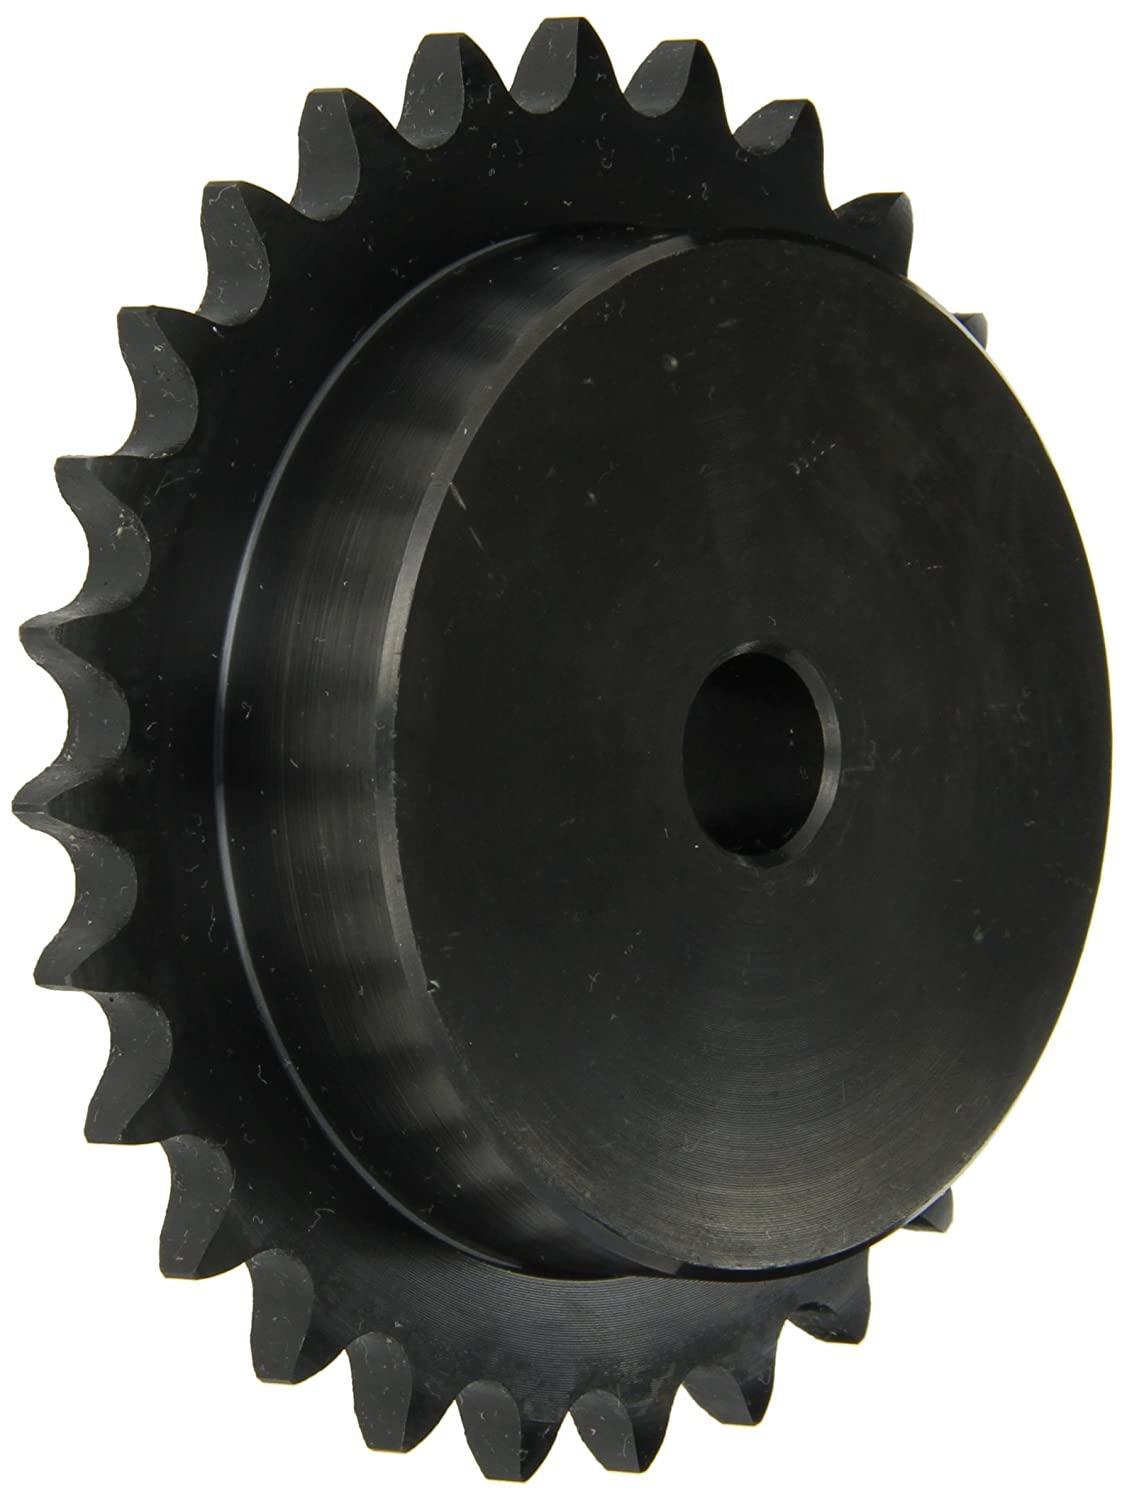 100B27 Roller Chain Sprocket With Stock Bore - Forces Inc